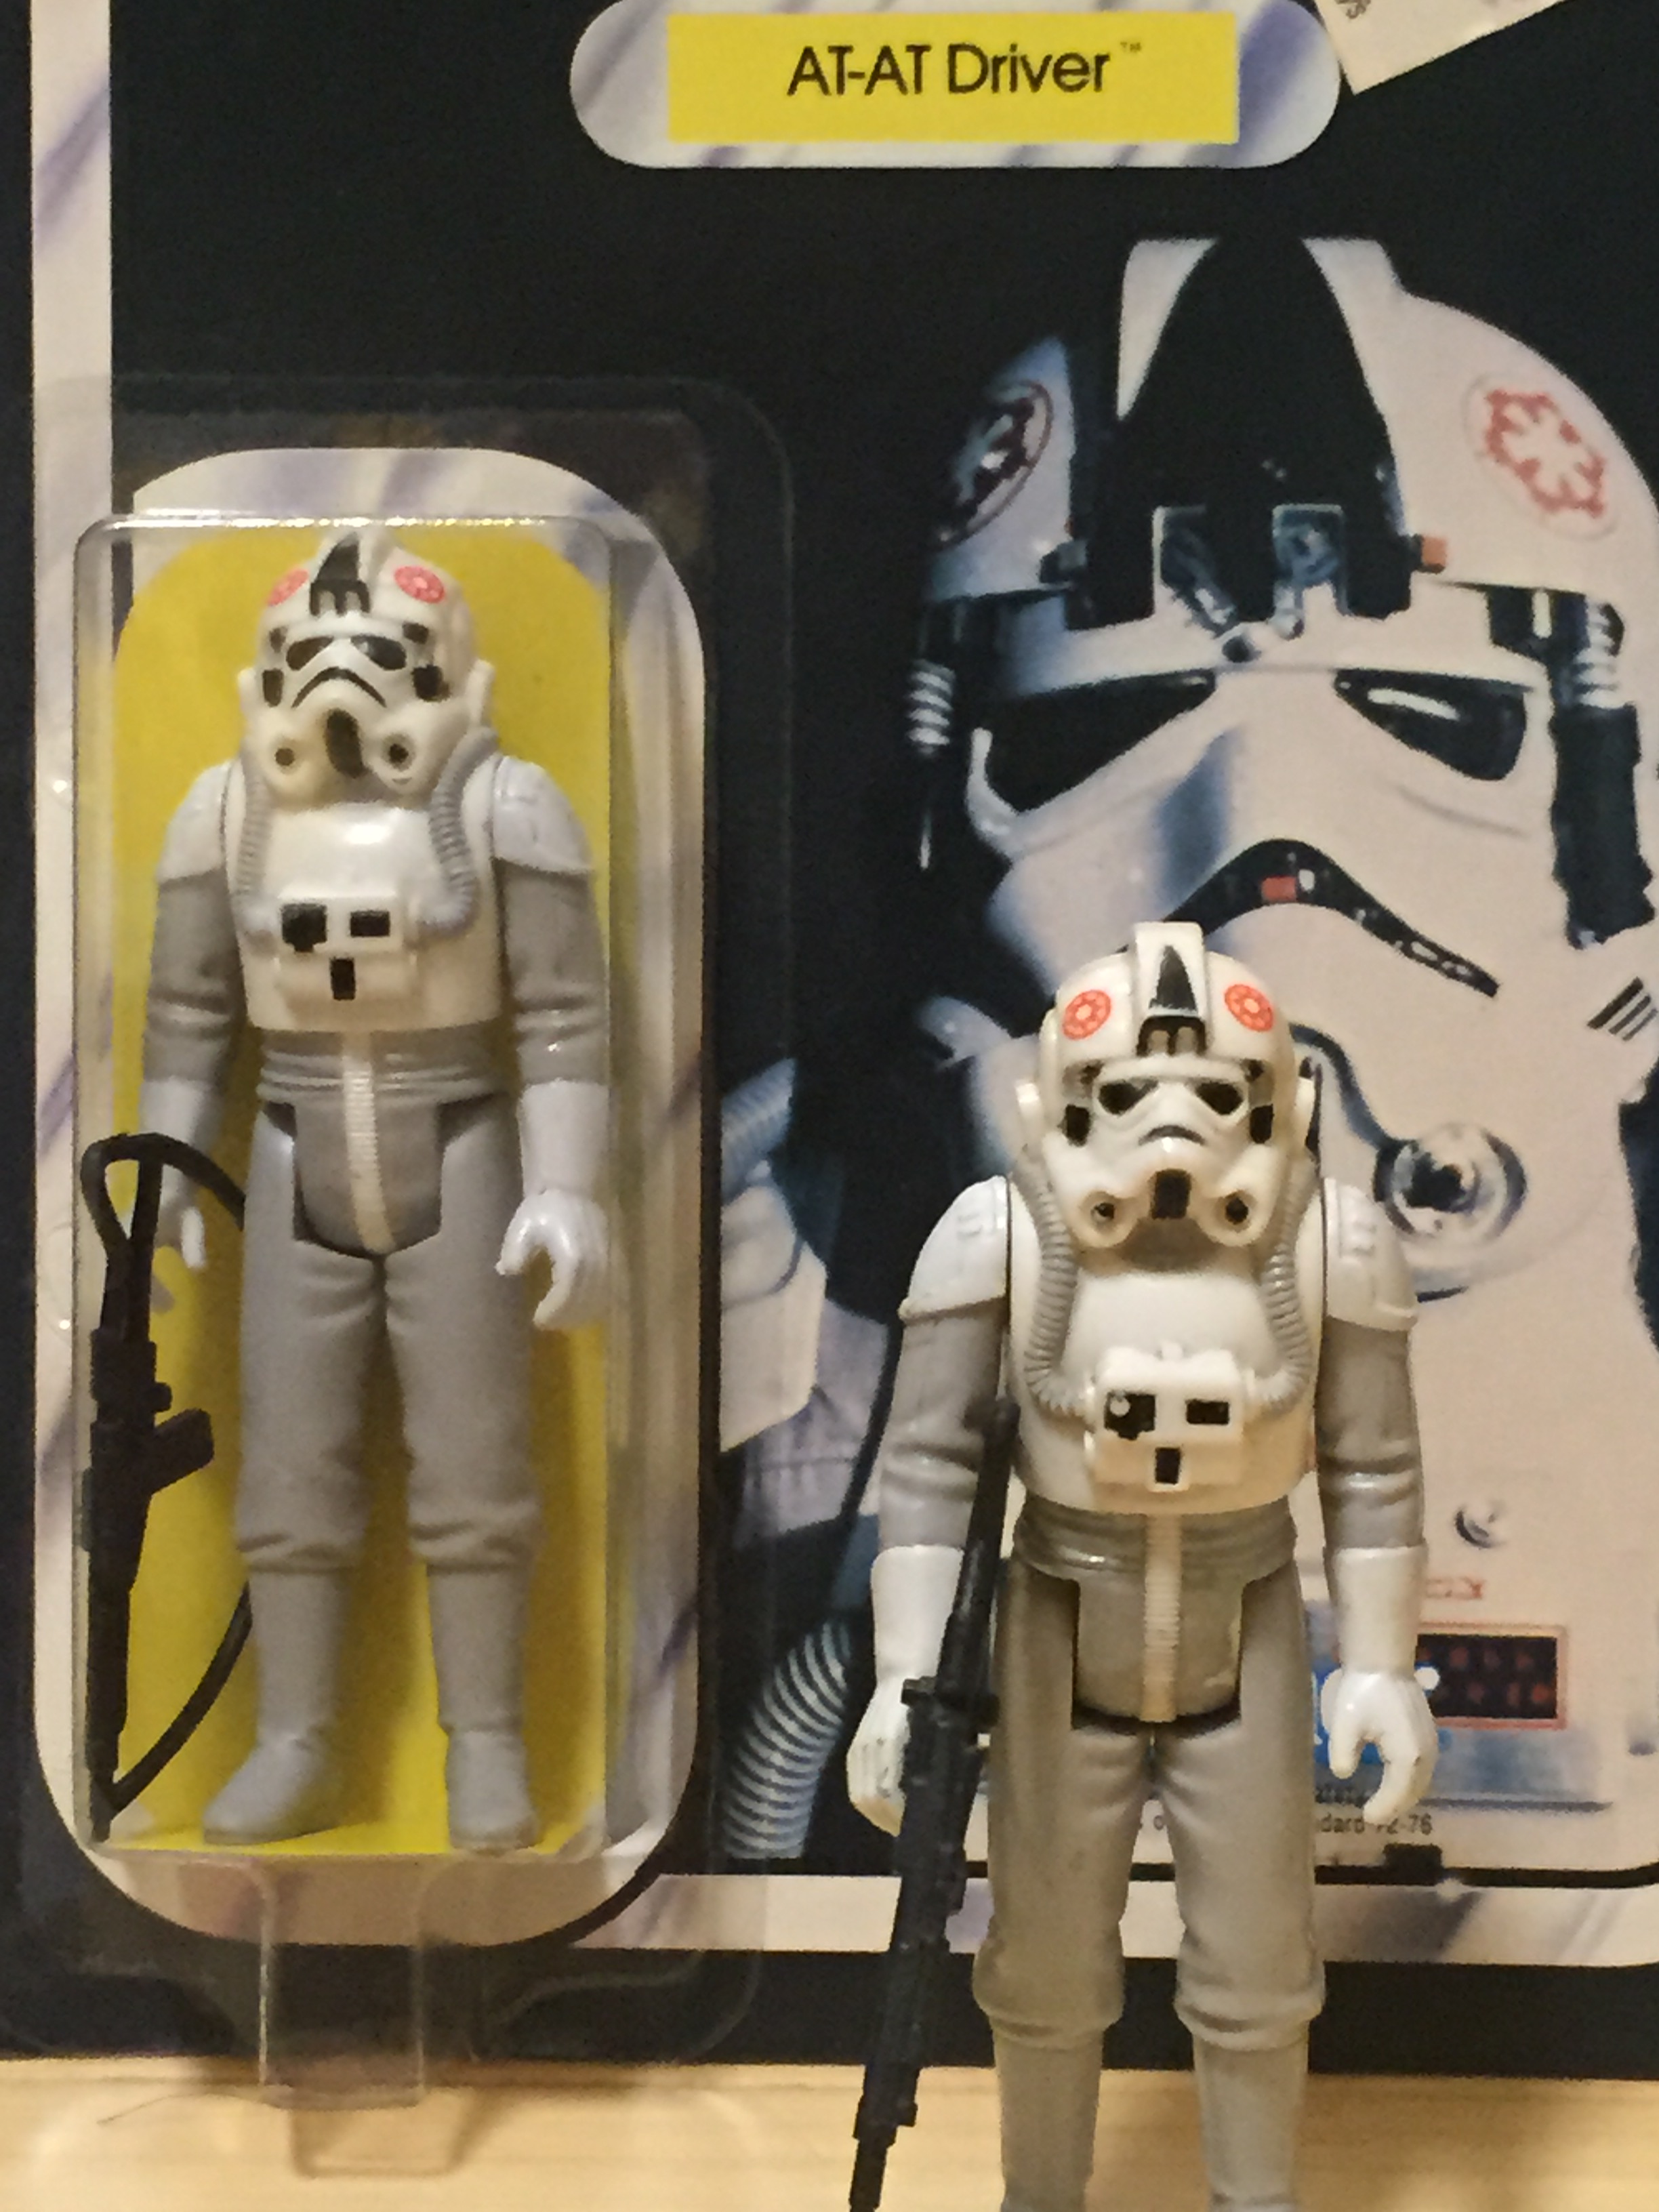 best star wars collectables